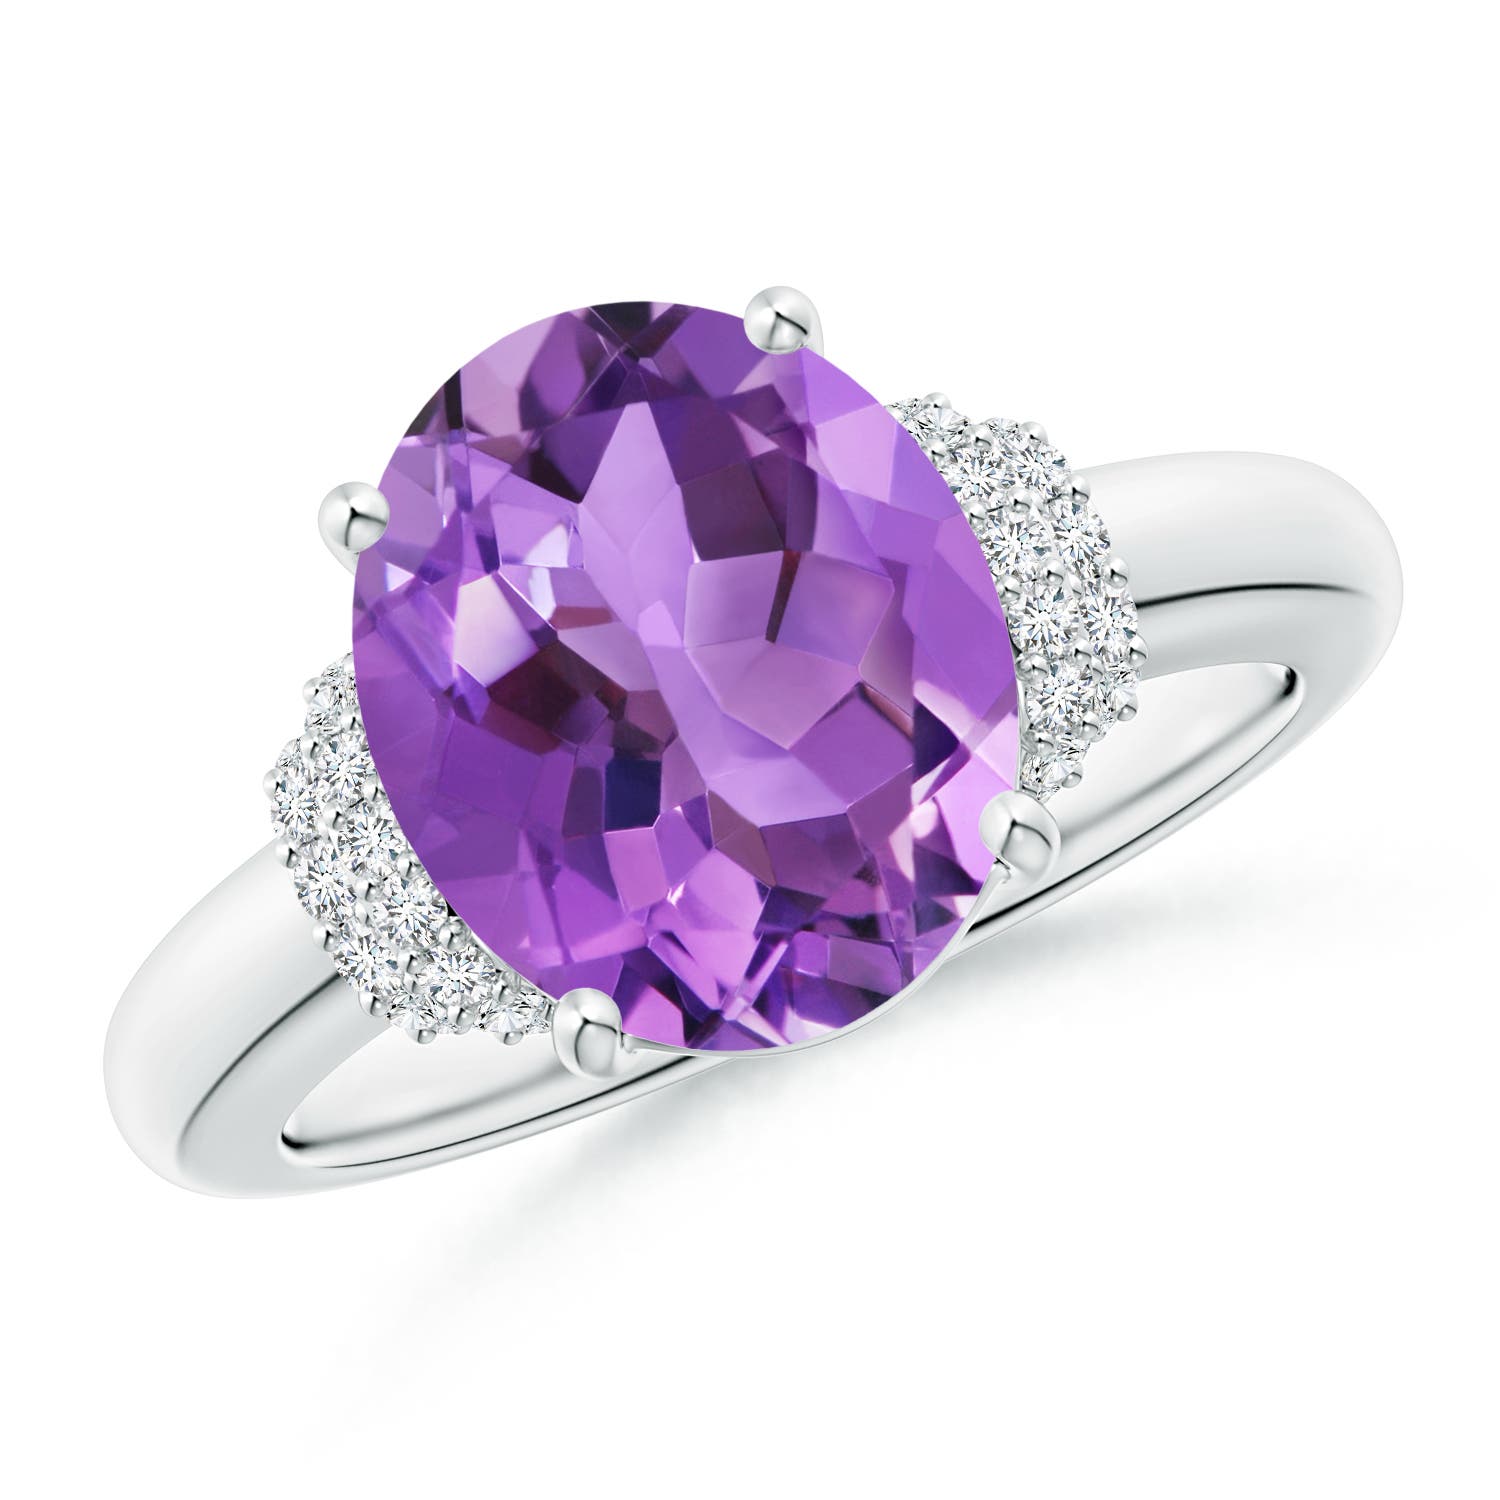 AA - Amethyst / 3.35 CT / 14 KT White Gold